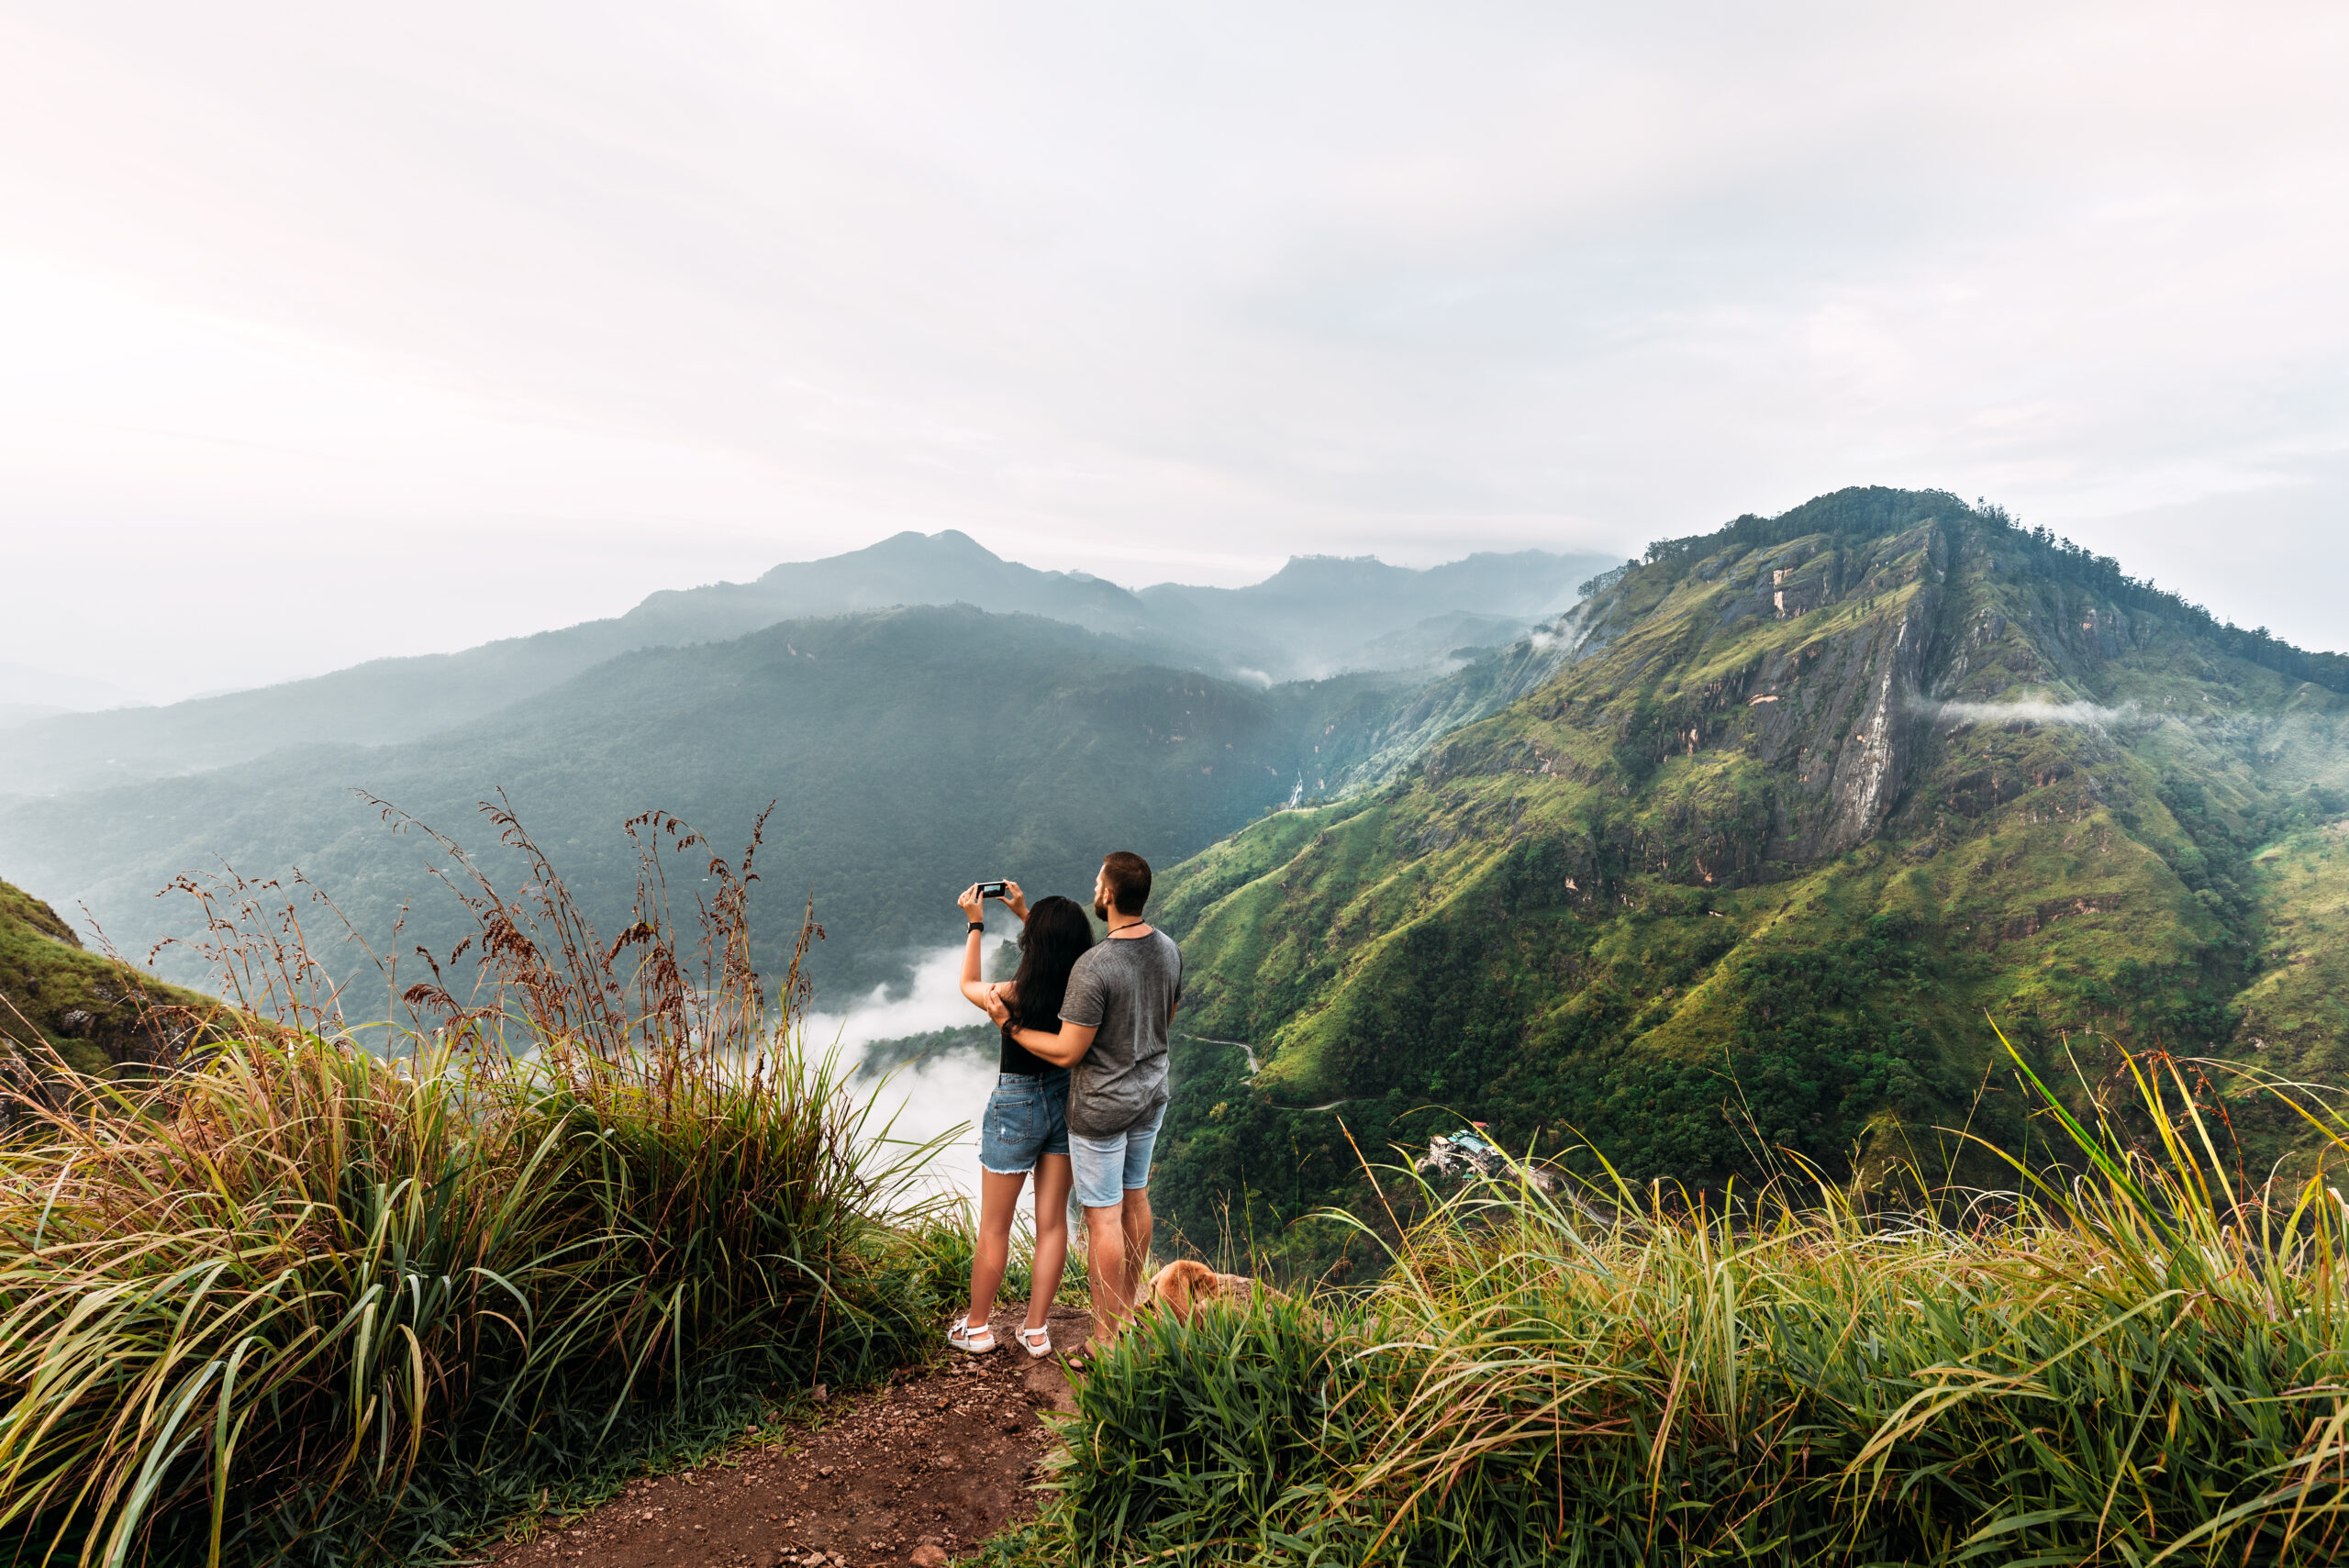 The couple travels the world. A couple in love travels to Sri Lanka. The couple travels to Asia. Man and woman meet the dawn in the mountains. Vacation in Asia. Happy couple in the mountains.